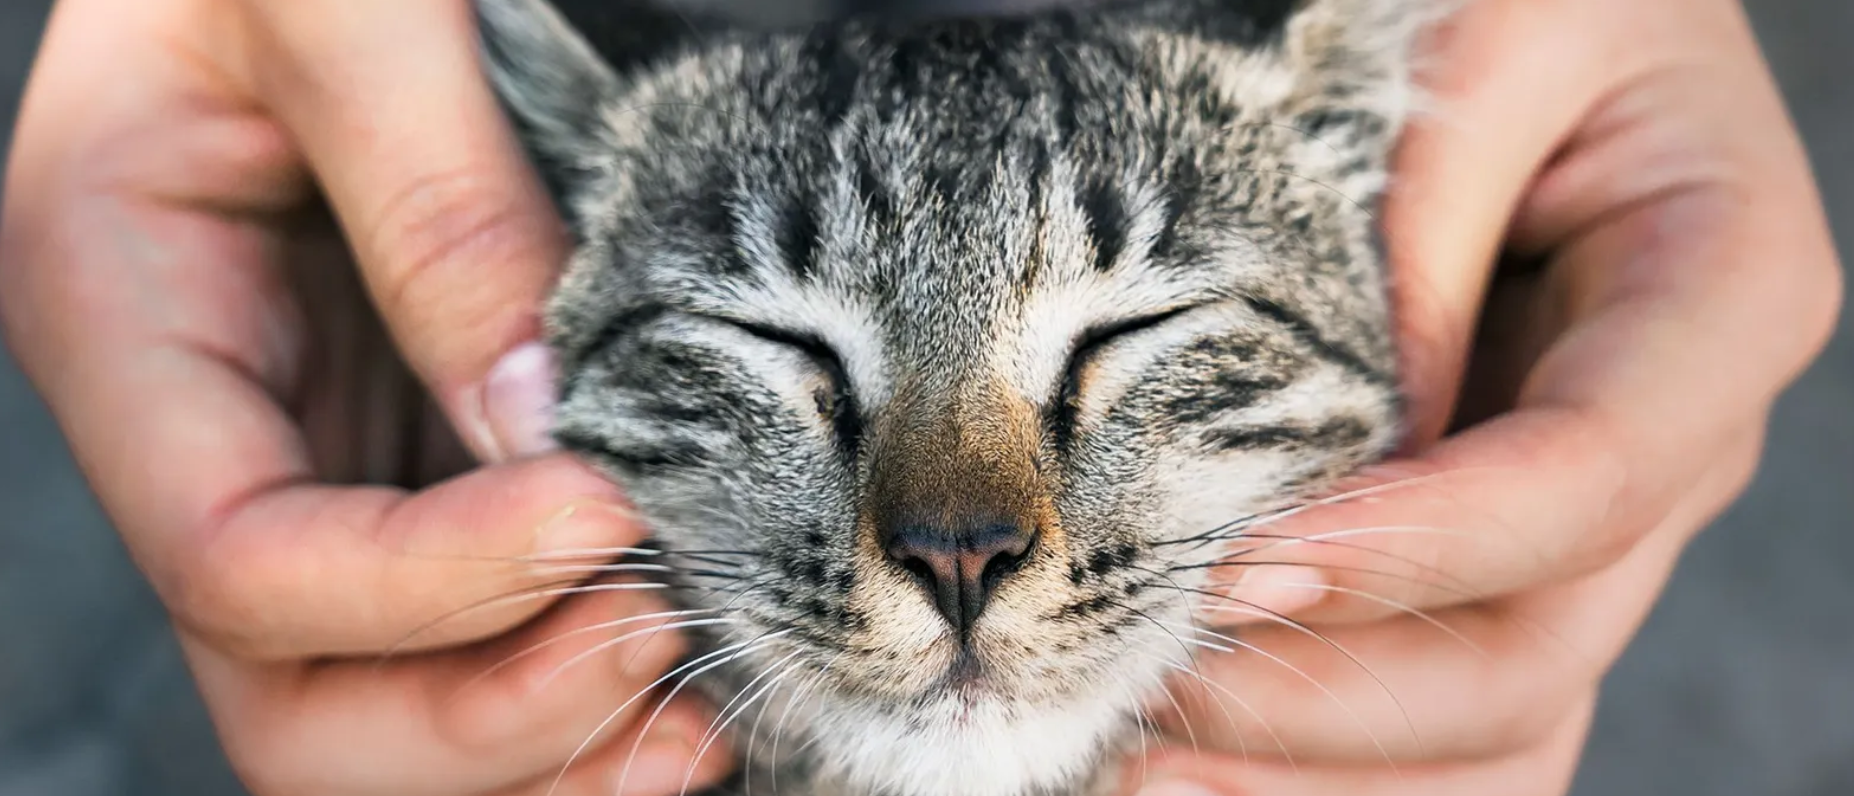 Happy cat getting it's face scratched